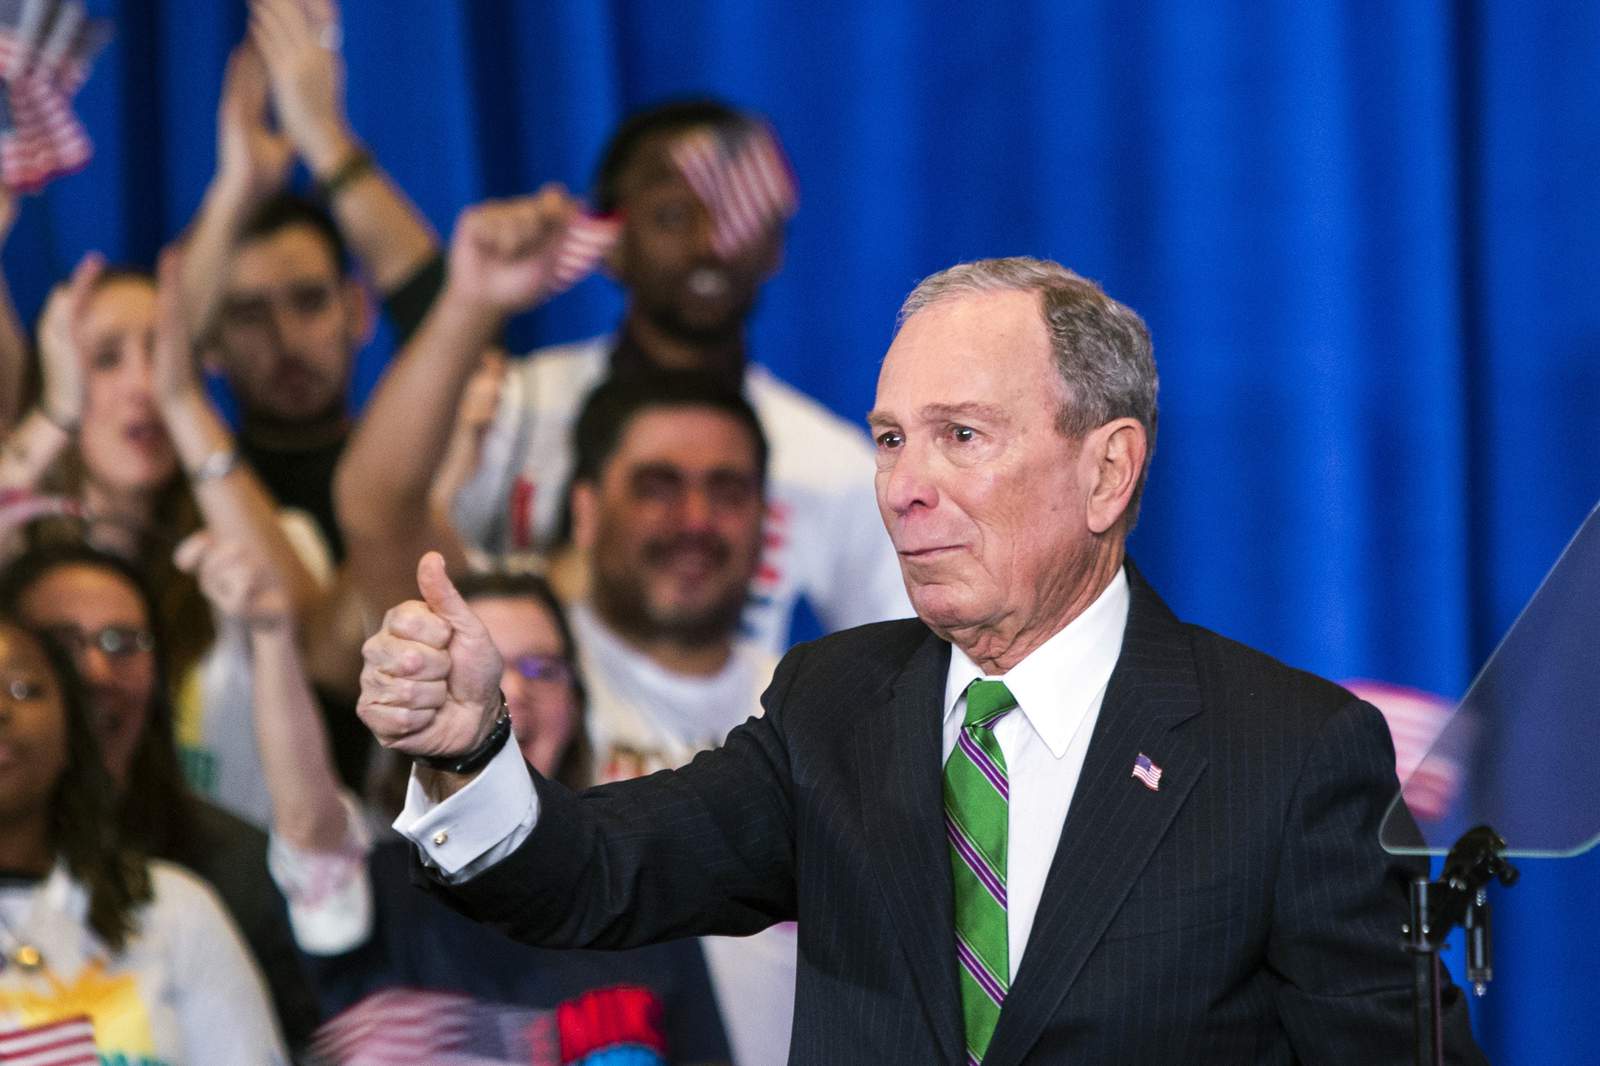 Bloomberg's hope for Super Tuesday splash lands in Pacific